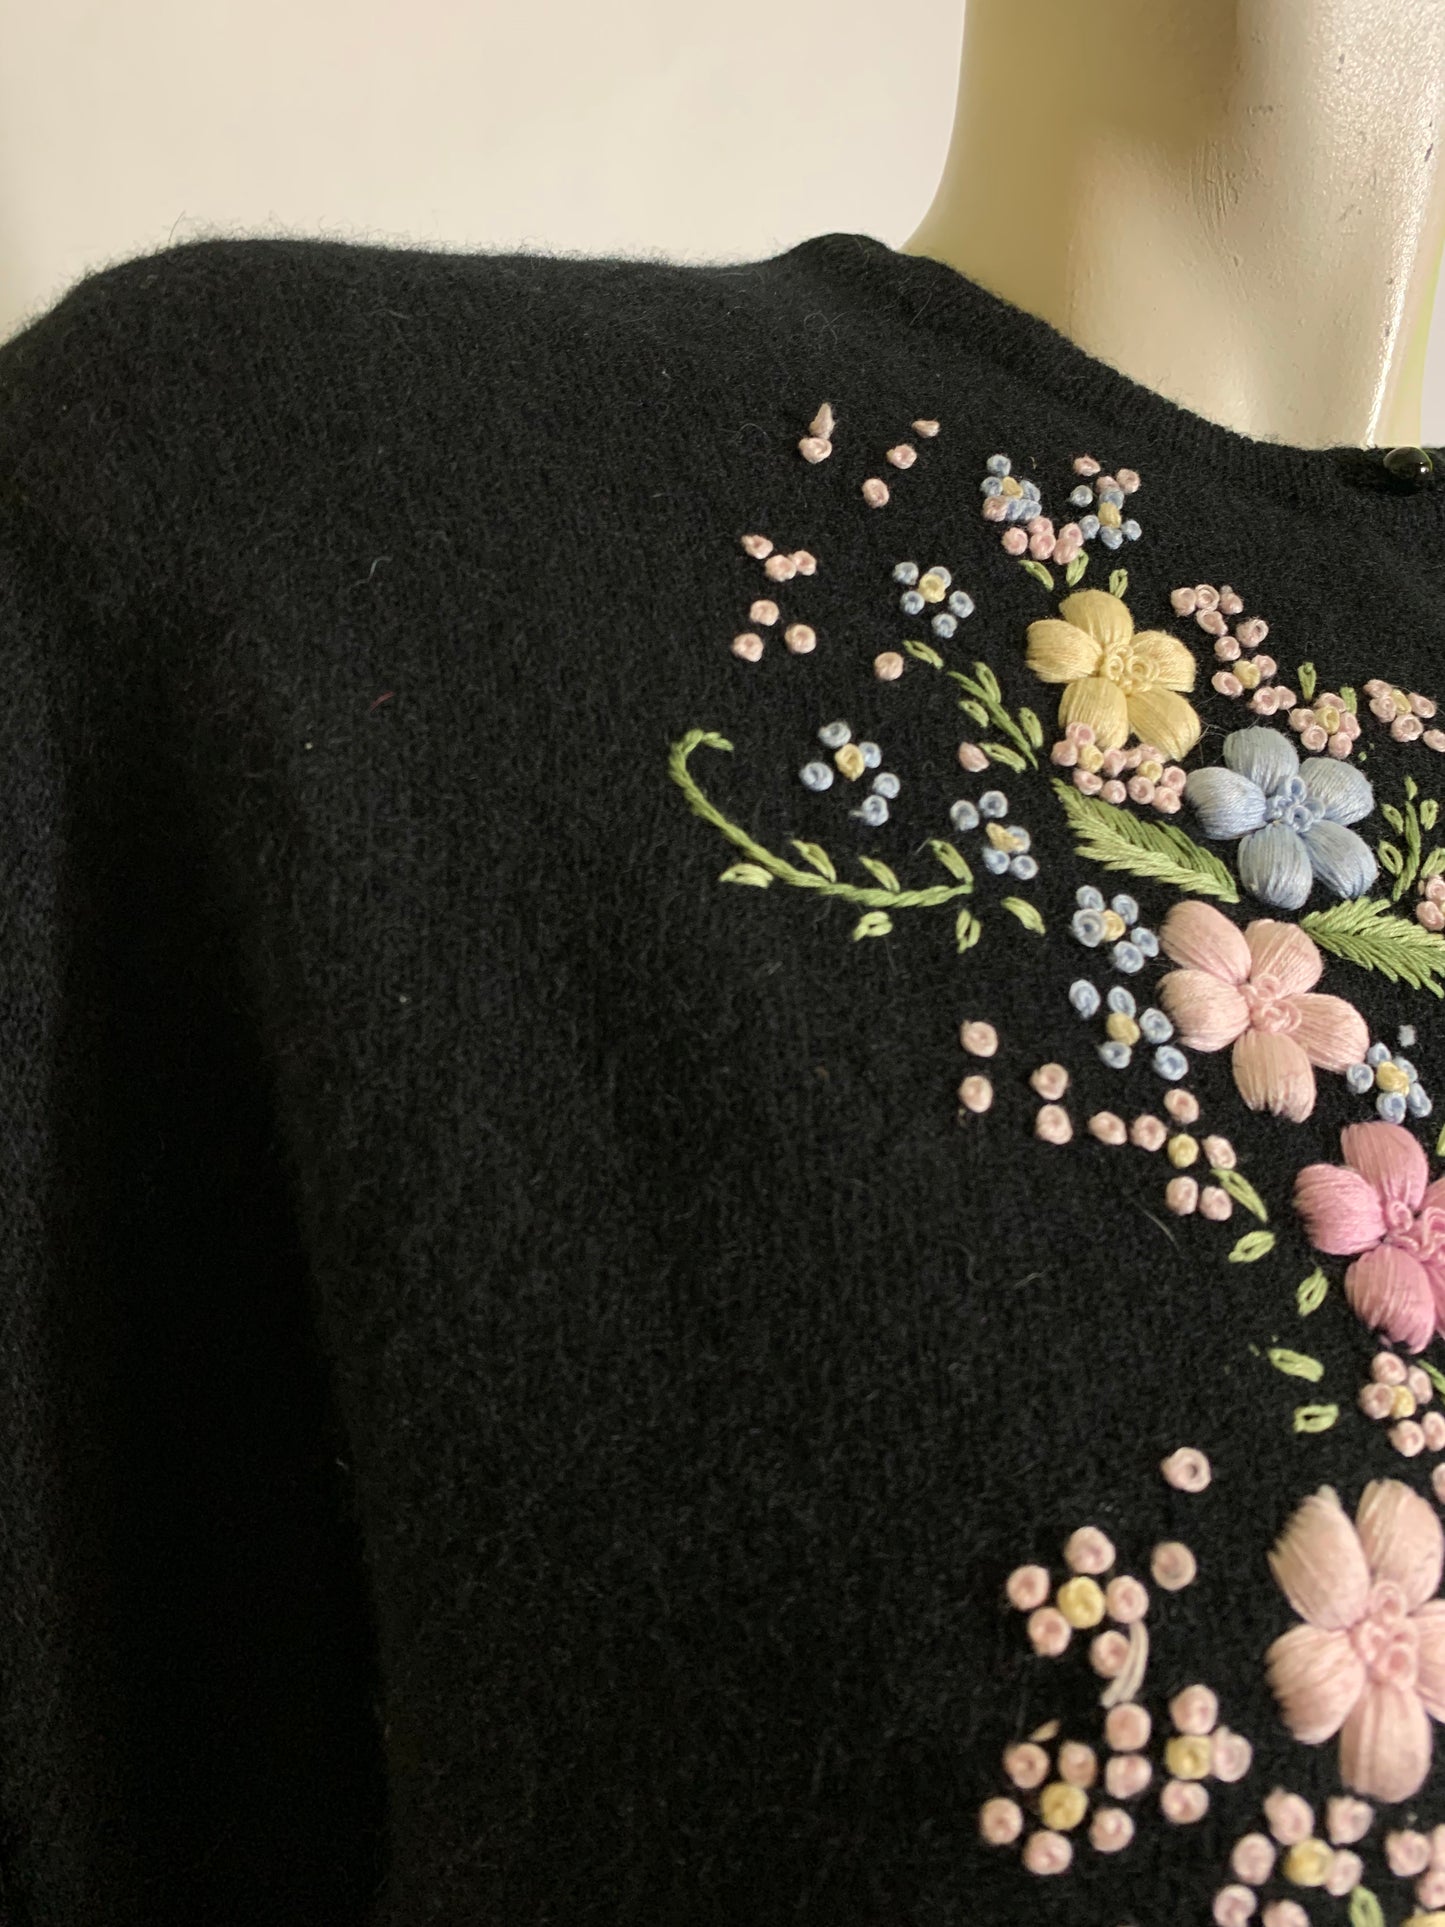 Black Cashmere Flower Embroidered Beaded Button Front Cardigan Sweater circa 1960s